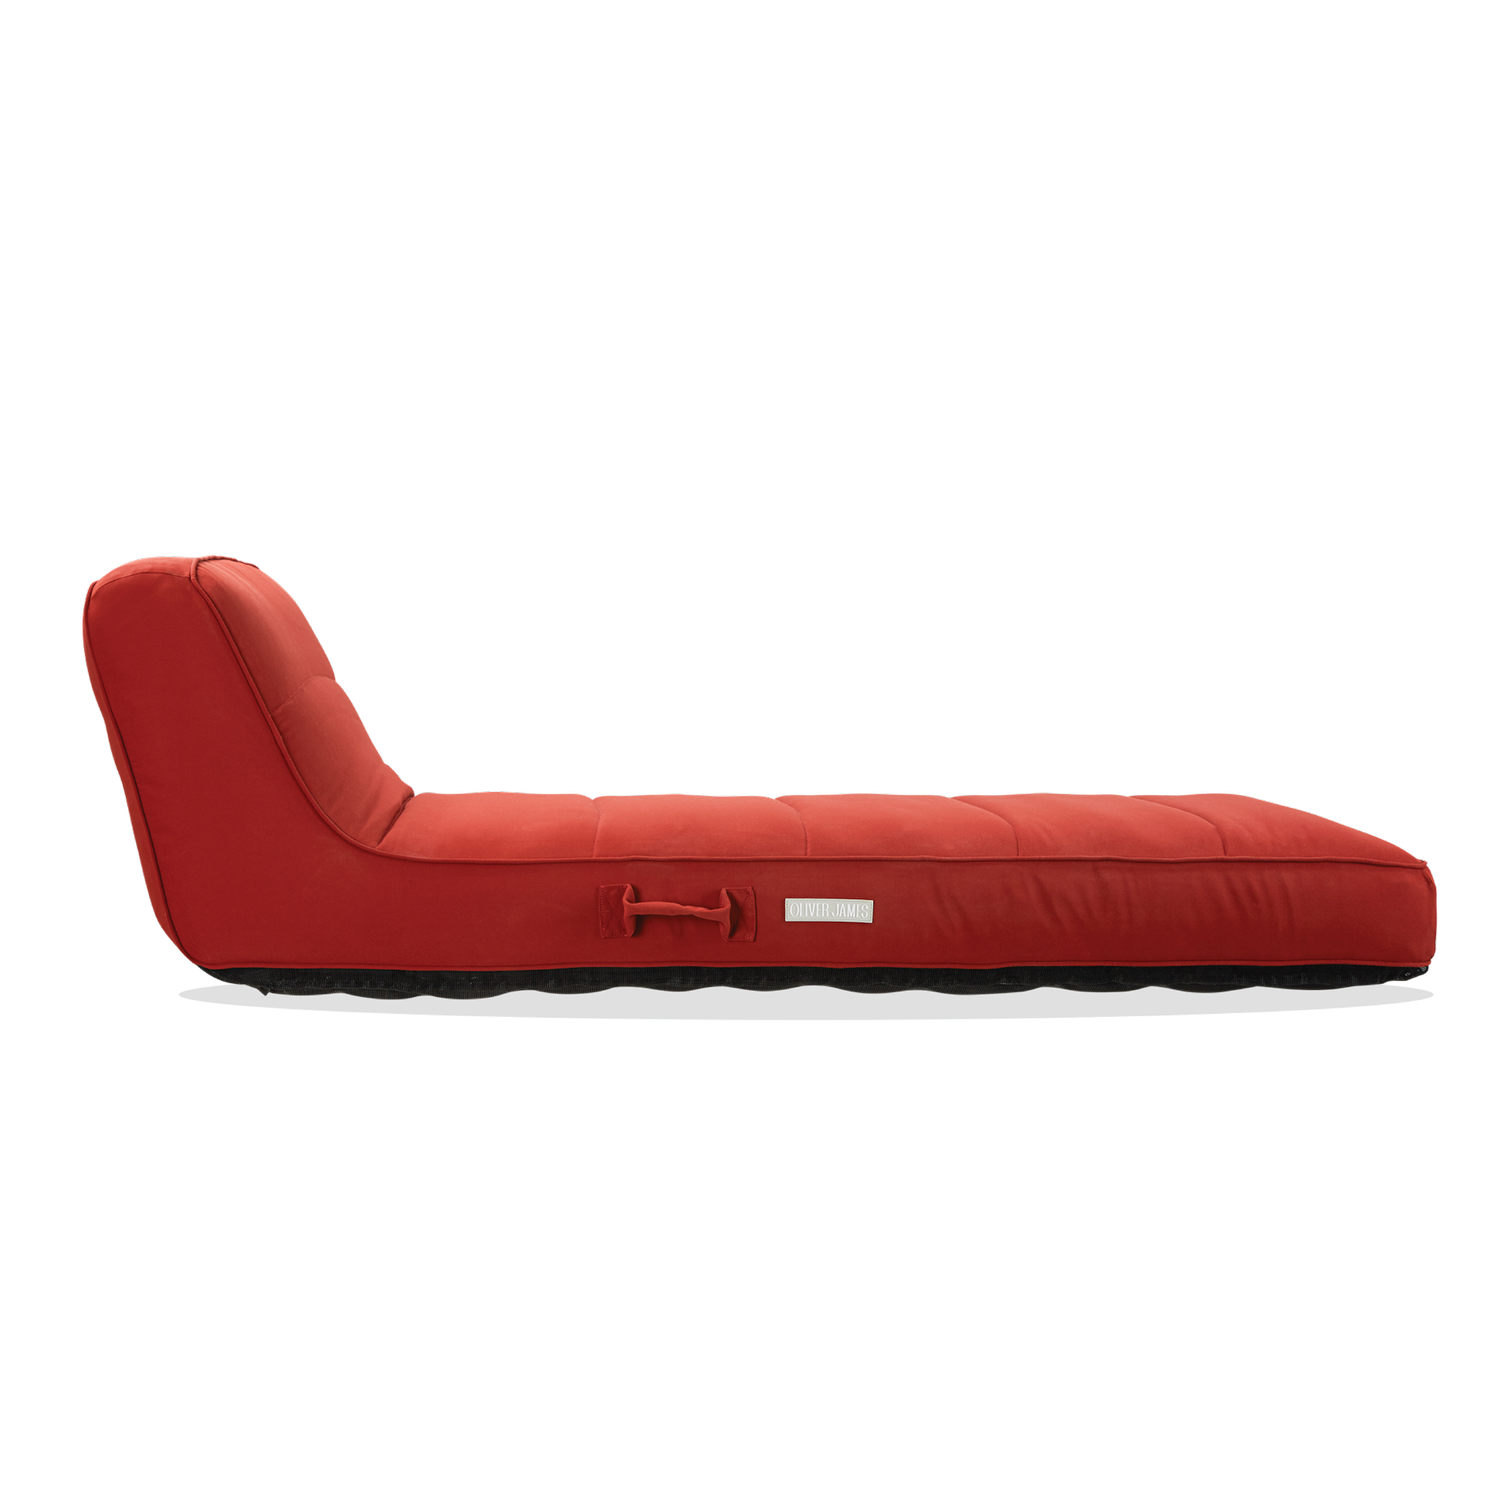 The side profile and shape of a terracotta colored pool float for adults.